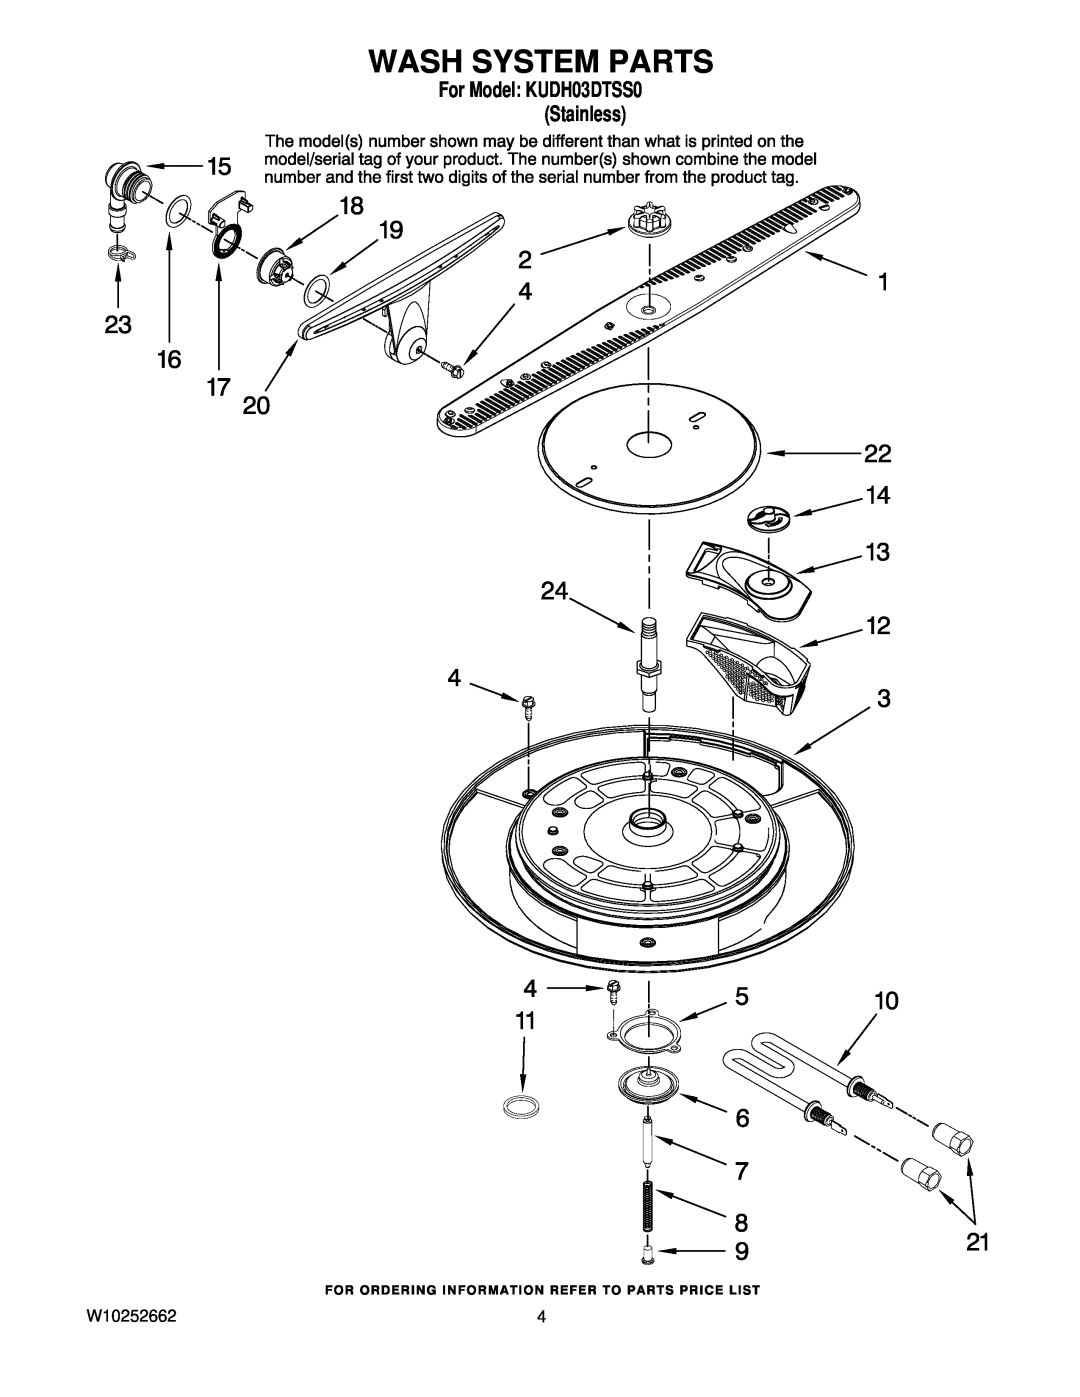 KitchenAid manual Wash System Parts, W10252662, For Model KUDH03DTSS0 Stainless 